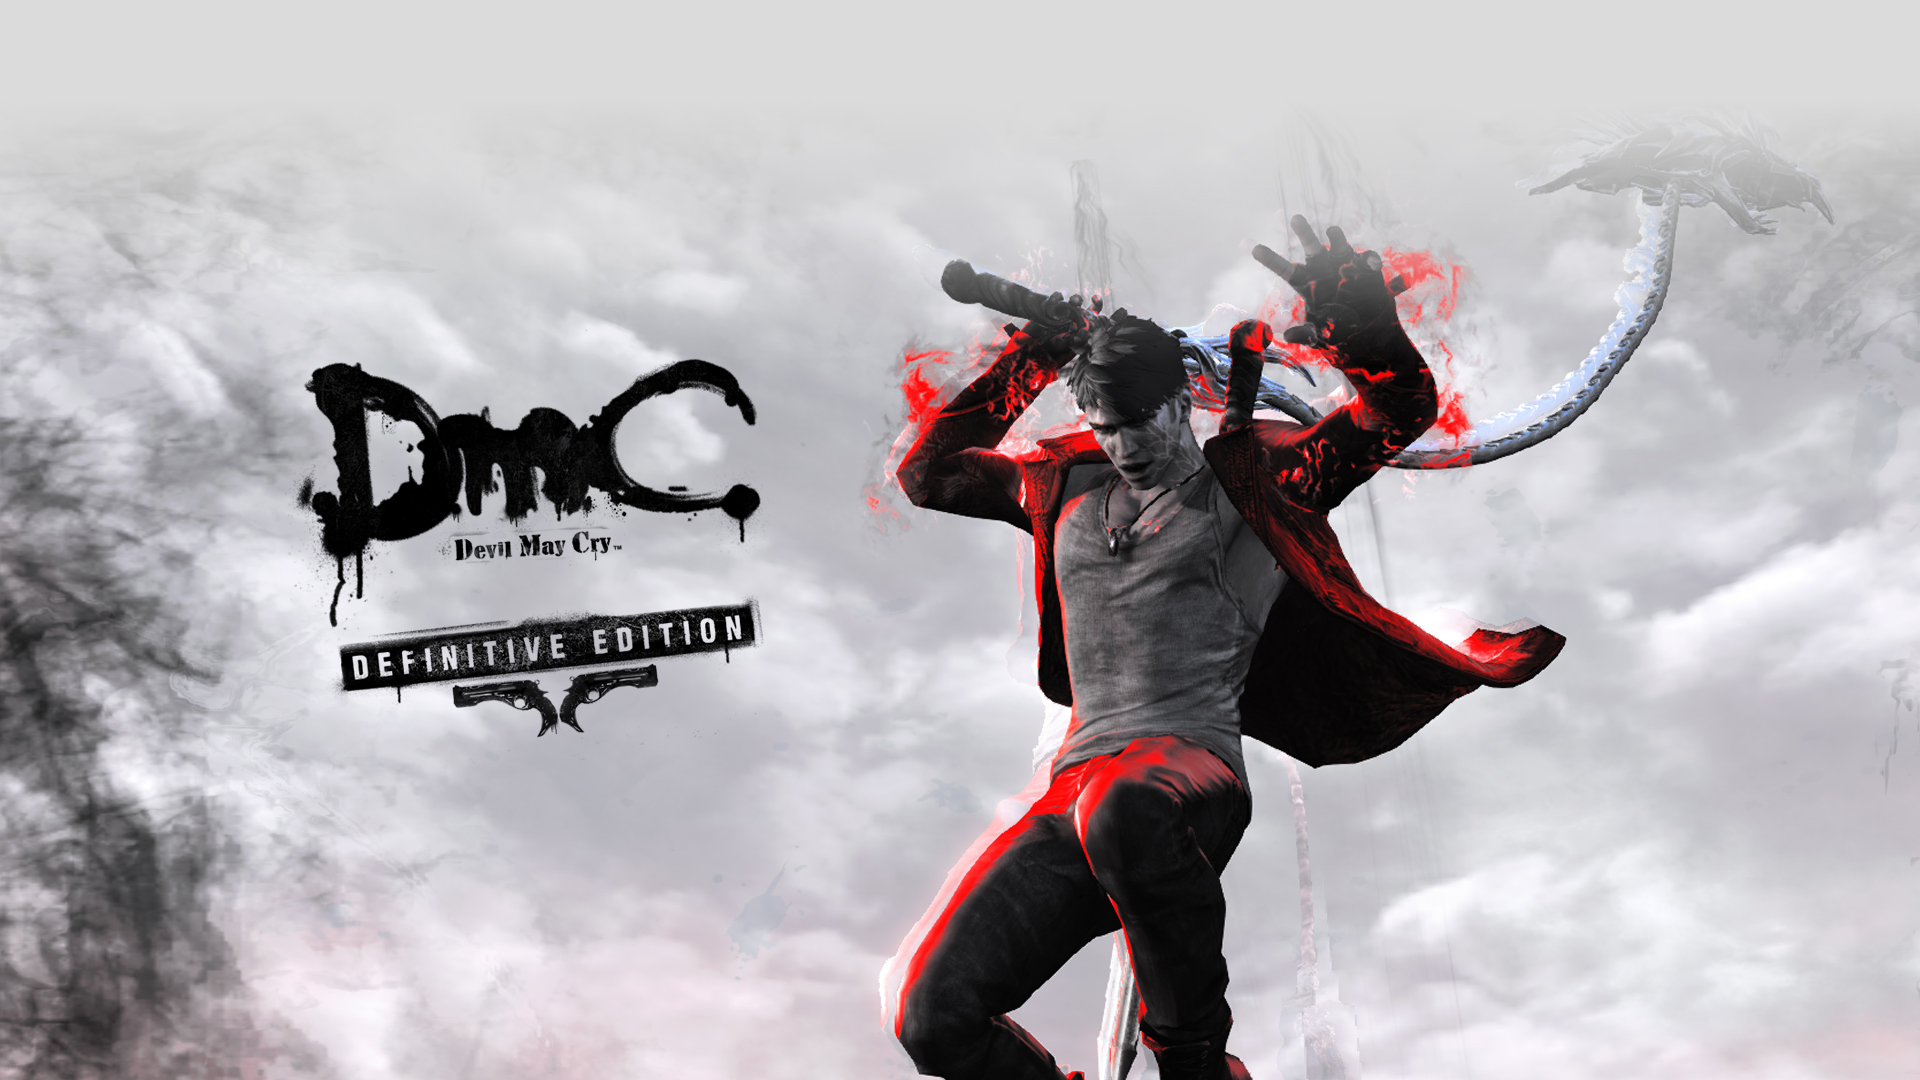 Videogame review: DmC: Devil May Cry – Cult Spark